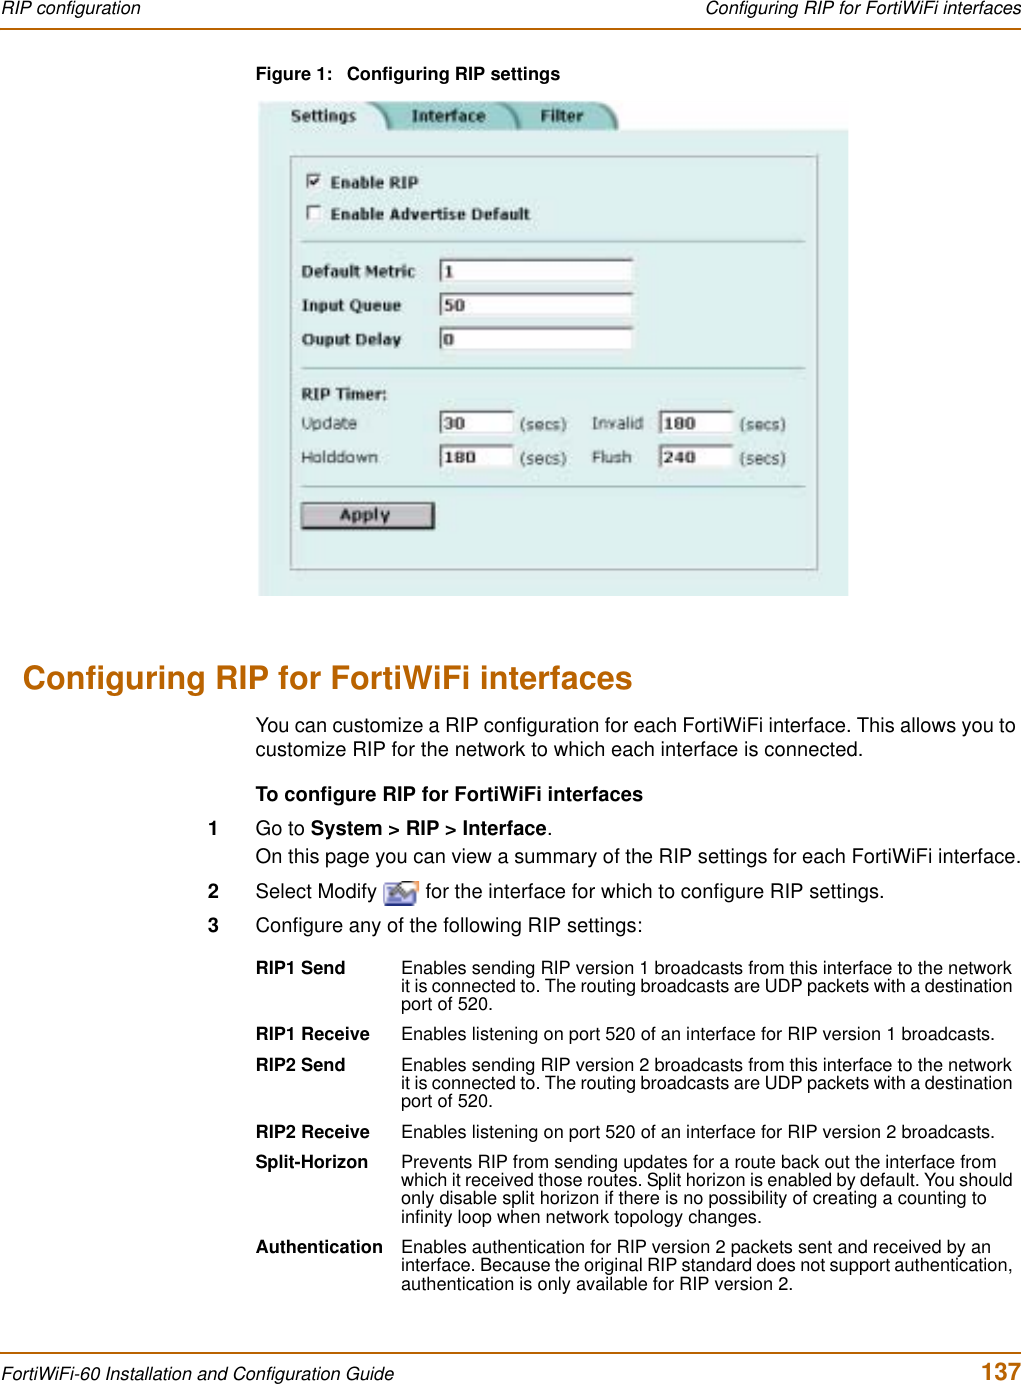 RIP configuration  Configuring RIP for FortiWiFi interfacesFortiWiFi-60 Installation and Configuration Guide  137Figure 1: Configuring RIP settingsConfiguring RIP for FortiWiFi interfacesYou can customize a RIP configuration for each FortiWiFi interface. This allows you to customize RIP for the network to which each interface is connected.To configure RIP for FortiWiFi interfaces1Go to System &gt; RIP &gt; Interface.On this page you can view a summary of the RIP settings for each FortiWiFi interface.2Select Modify   for the interface for which to configure RIP settings.3Configure any of the following RIP settings:RIP1 Send Enables sending RIP version 1 broadcasts from this interface to the network it is connected to. The routing broadcasts are UDP packets with a destination port of 520.RIP1 Receive Enables listening on port 520 of an interface for RIP version 1 broadcasts.RIP2 Send Enables sending RIP version 2 broadcasts from this interface to the network it is connected to. The routing broadcasts are UDP packets with a destination port of 520.RIP2 Receive Enables listening on port 520 of an interface for RIP version 2 broadcasts.Split-Horizon Prevents RIP from sending updates for a route back out the interface from which it received those routes. Split horizon is enabled by default. You should only disable split horizon if there is no possibility of creating a counting to infinity loop when network topology changes.Authentication Enables authentication for RIP version 2 packets sent and received by an interface. Because the original RIP standard does not support authentication, authentication is only available for RIP version 2.